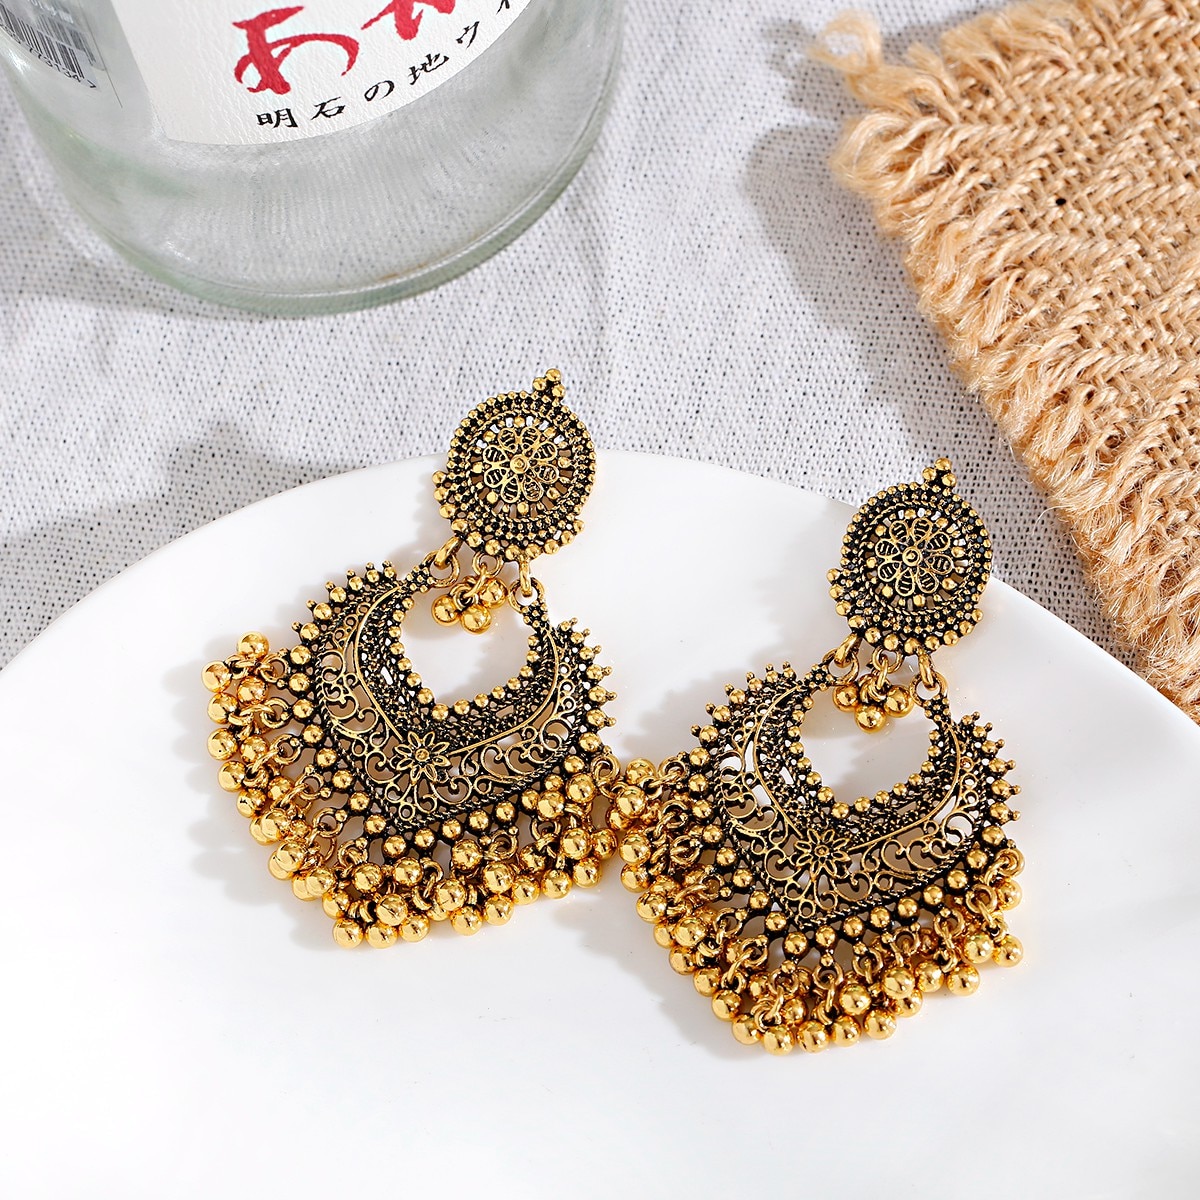 12-PairsLot-Boho-Afghan-Ethnic-Earrings-For-Women-Pendient-Pink-Gold-Silver-Color-Bell-Ladies-Indian-3256803995211369-8